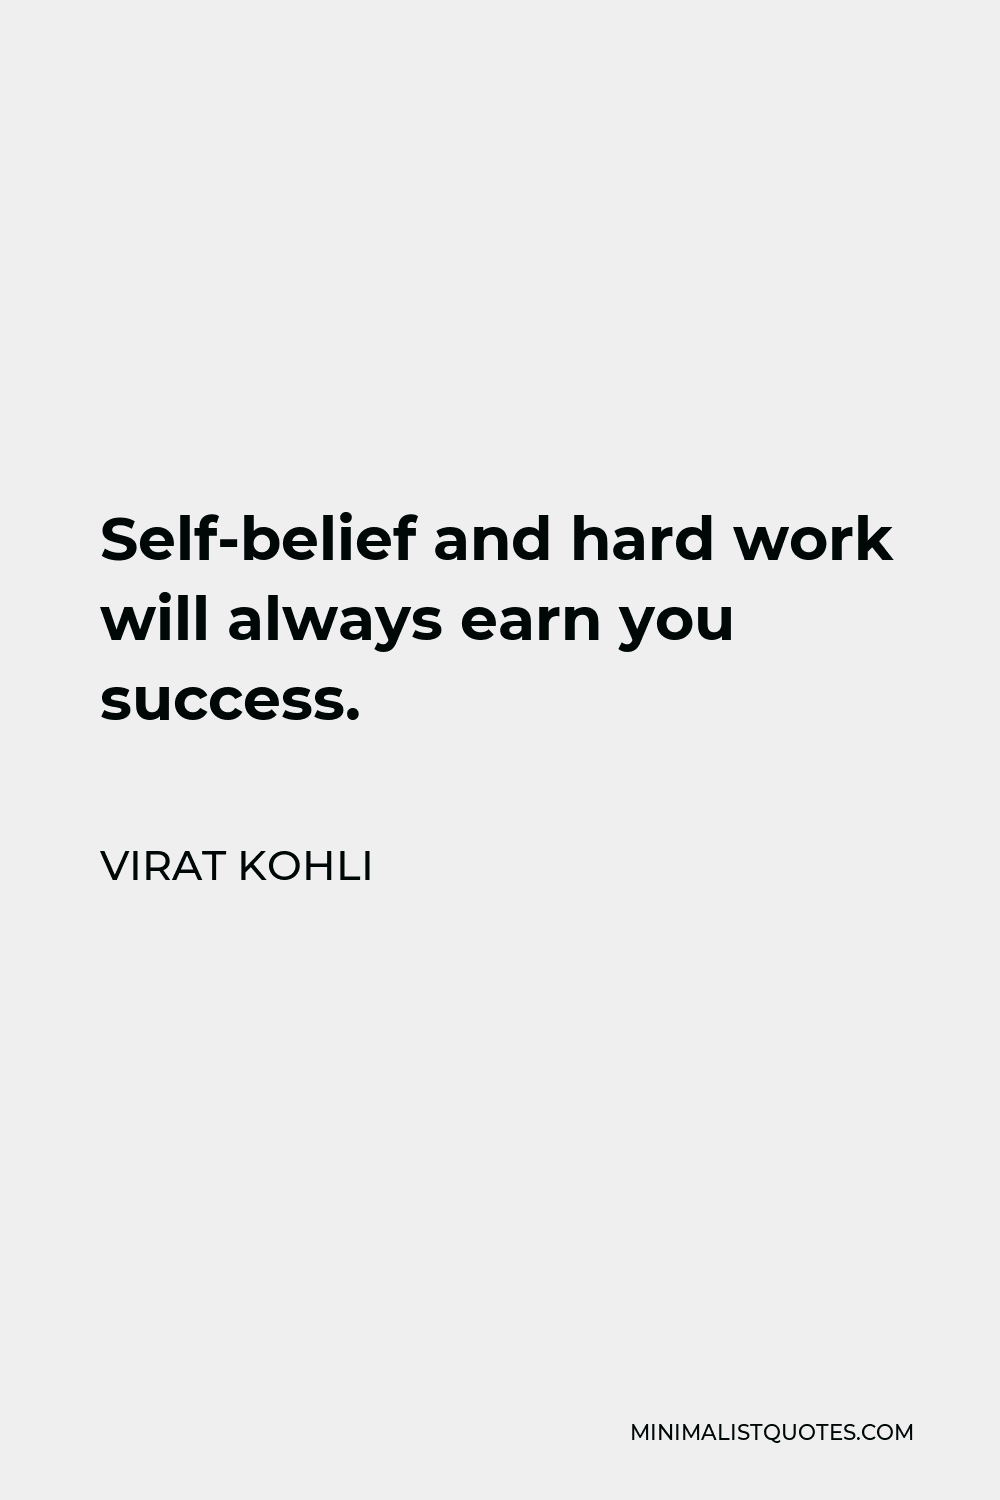 Virat Kohli Quote - Self-belief and hard work will always earn you success.